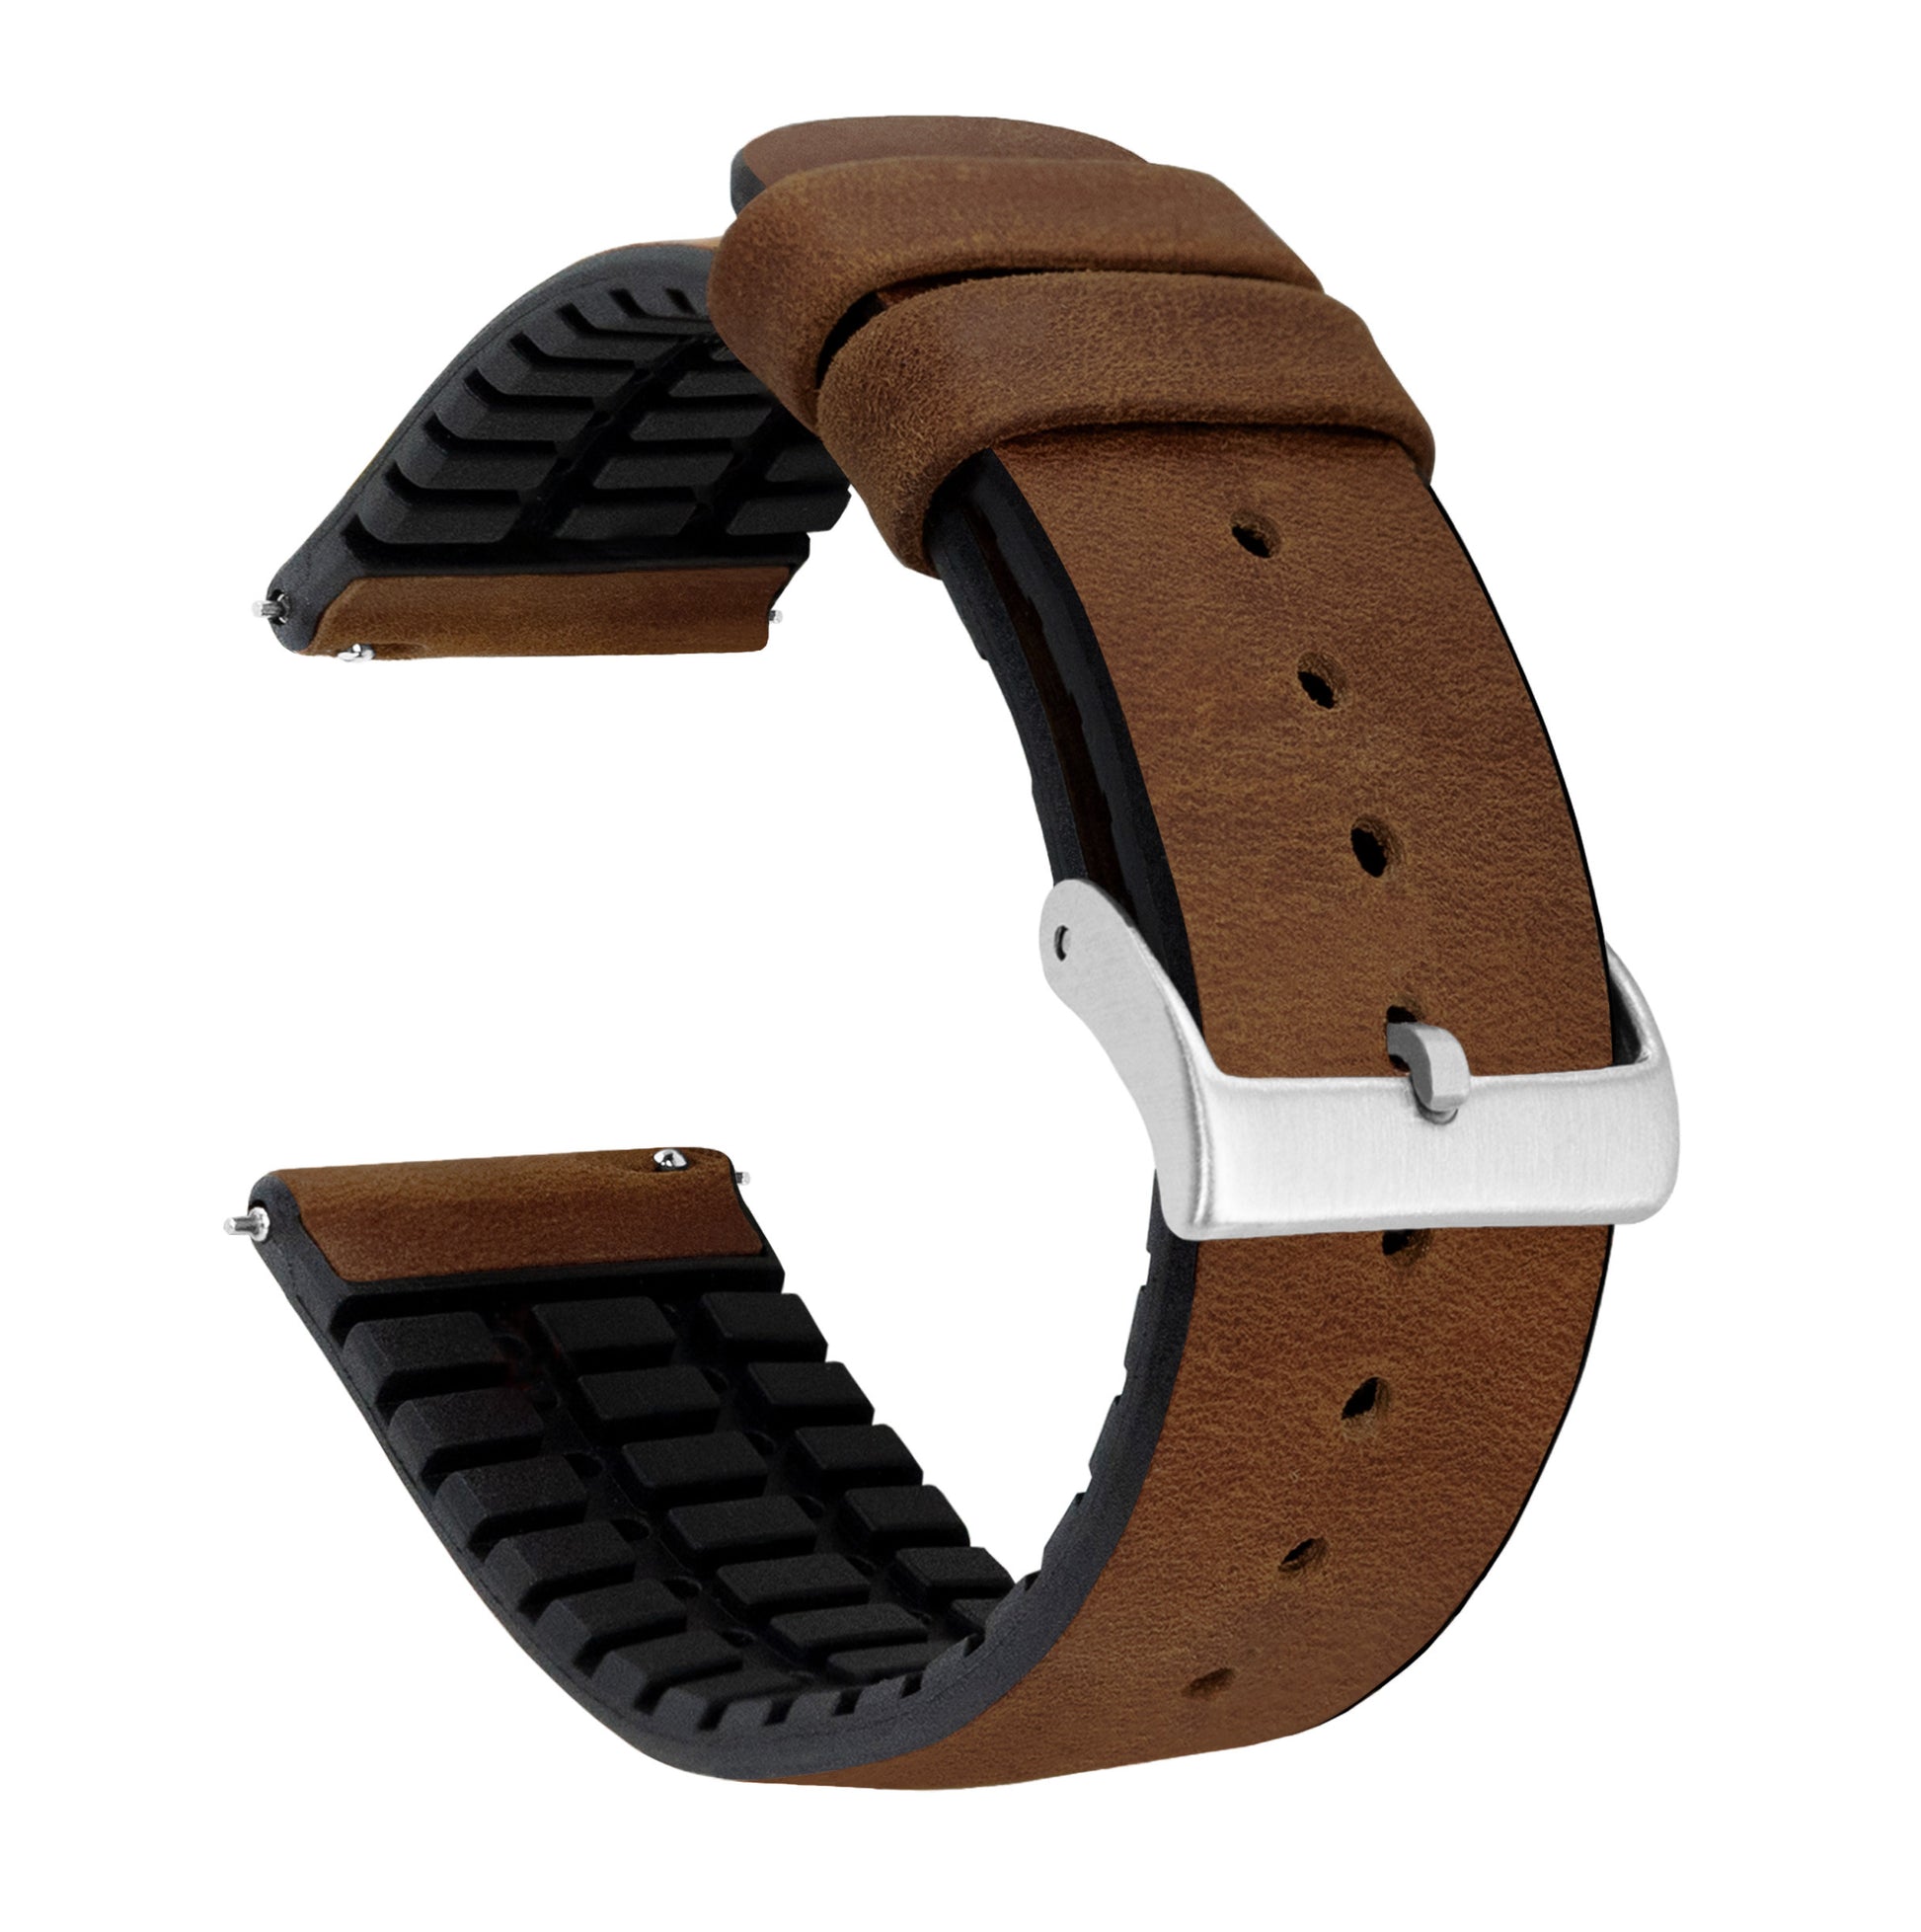 Moto 360 Gen2 | Leather and Rubber Hybrid | Oak Brown - Barton Watch Bands